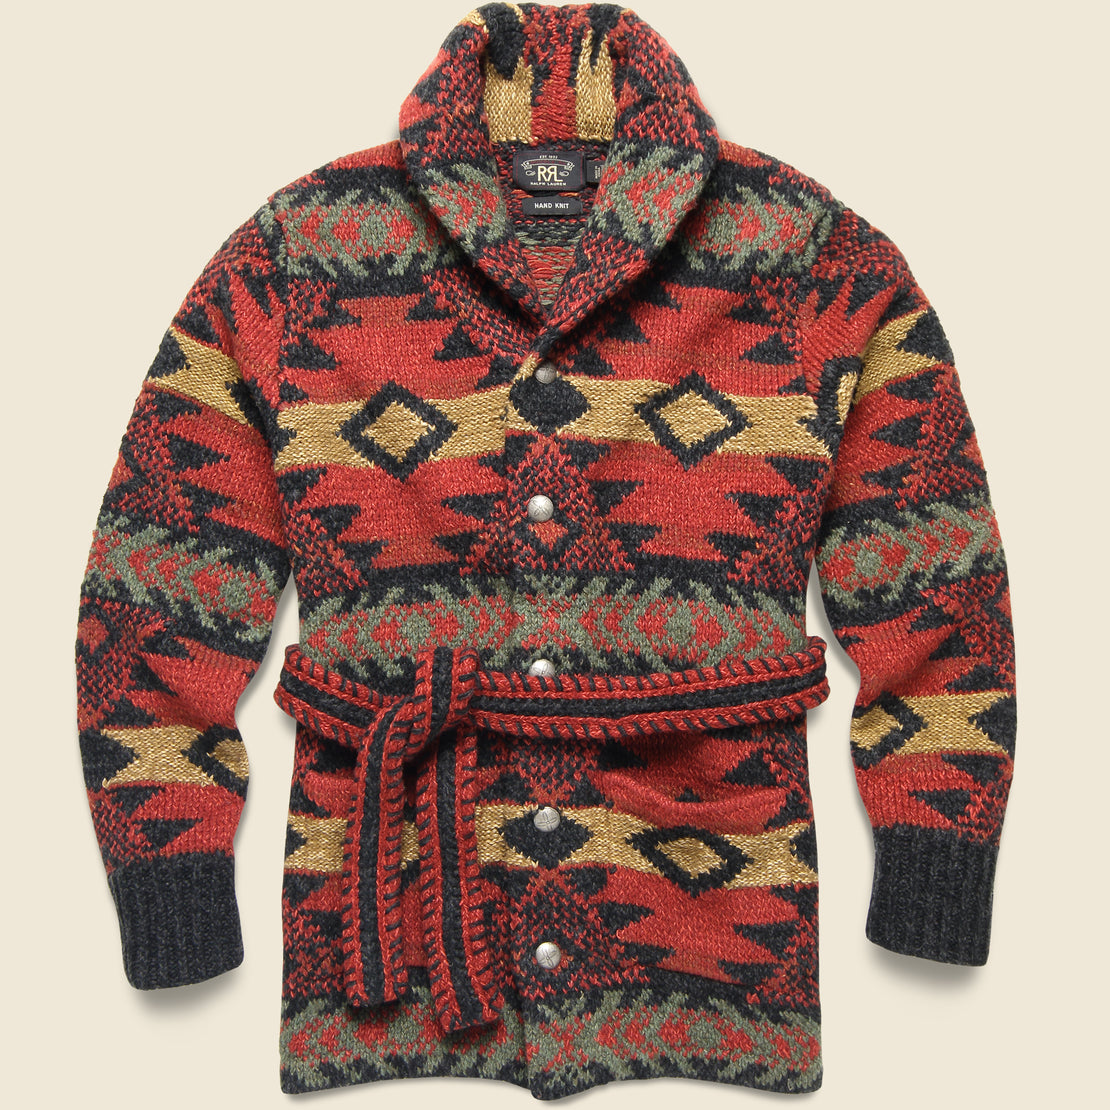 RRL Hand-Knit Ranch Cardigan - Red Multi